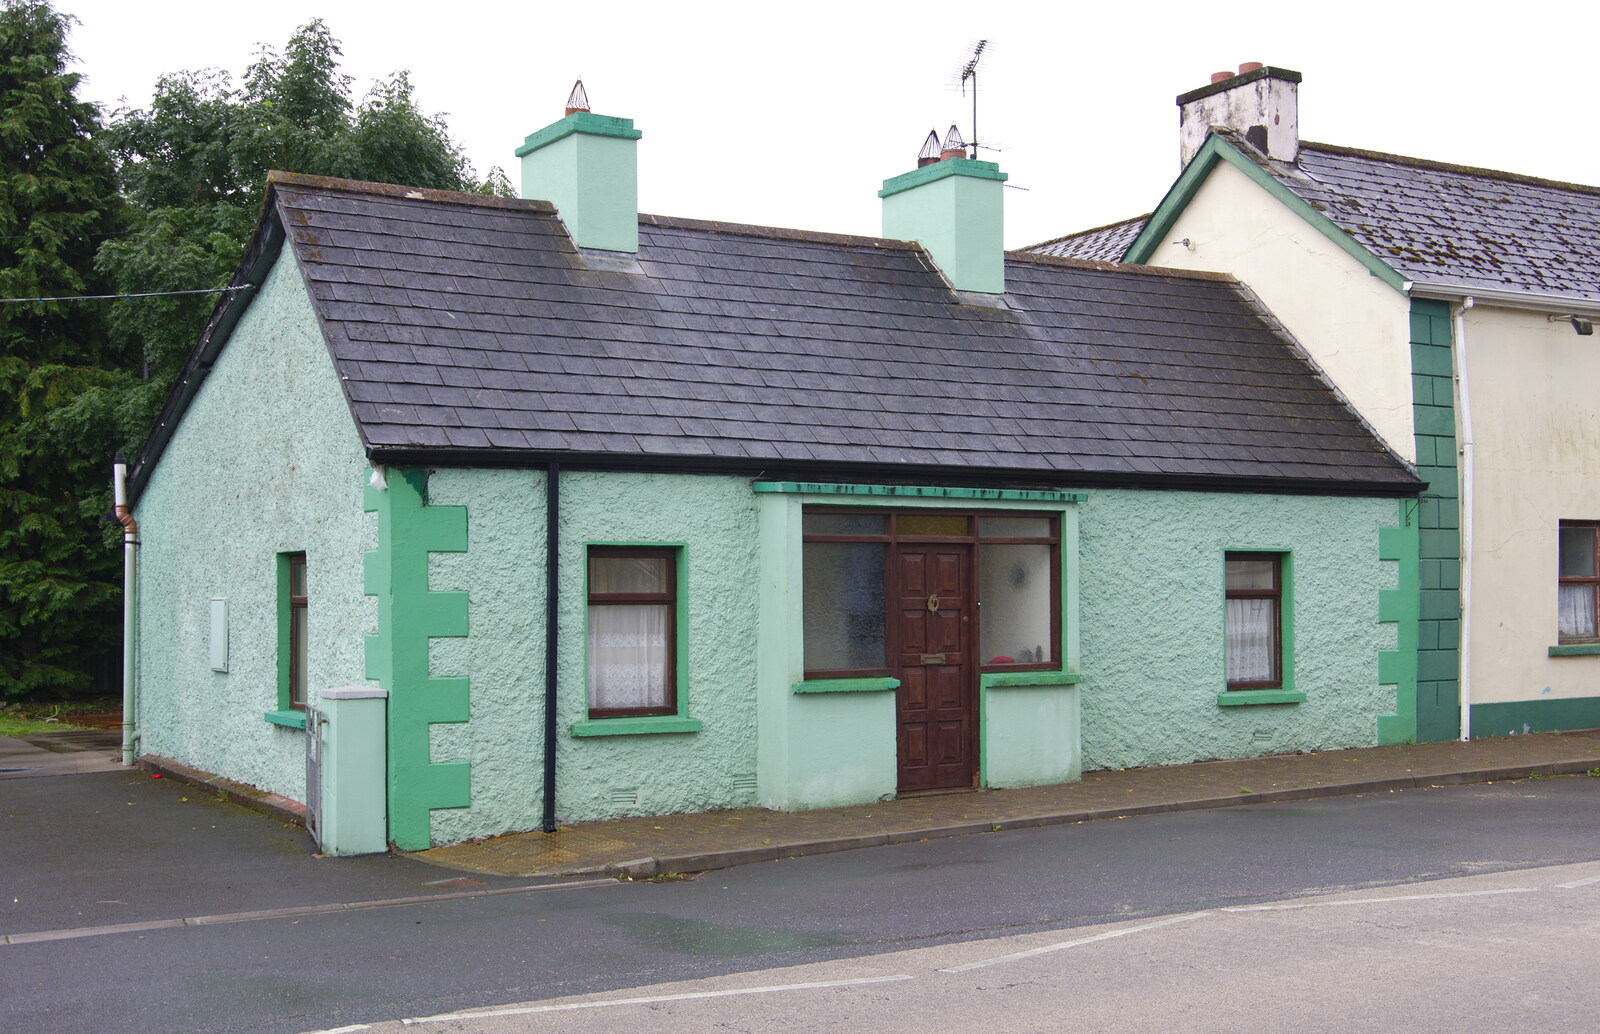 A peppermint-green house from Travels in the Borderlands: An Blaic/Blacklion to Belcoo and back, Cavan and Fermanagh, Ireland - 22nd August 2019